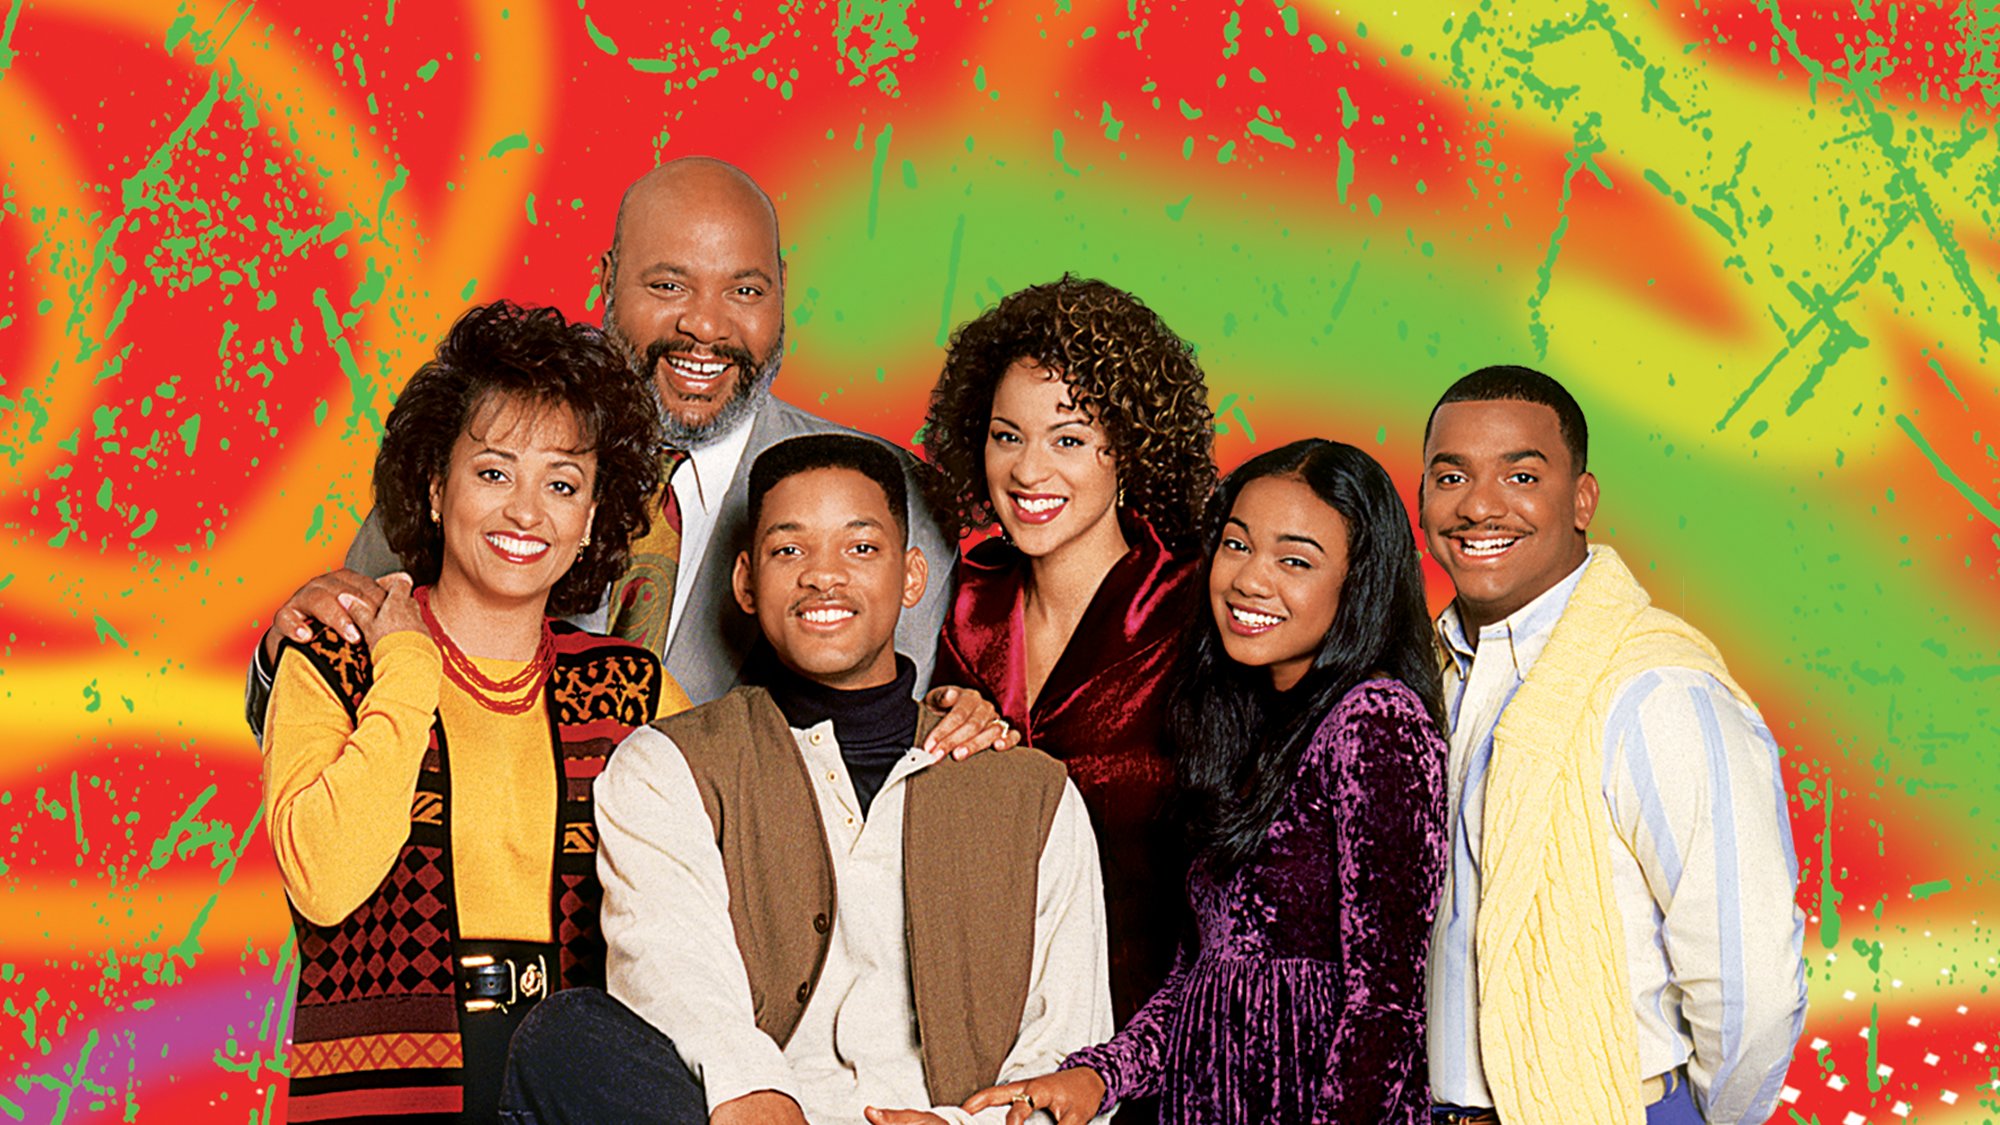 Will Smith takes his rightful place as The Fresh Prince of Bel-Air. 